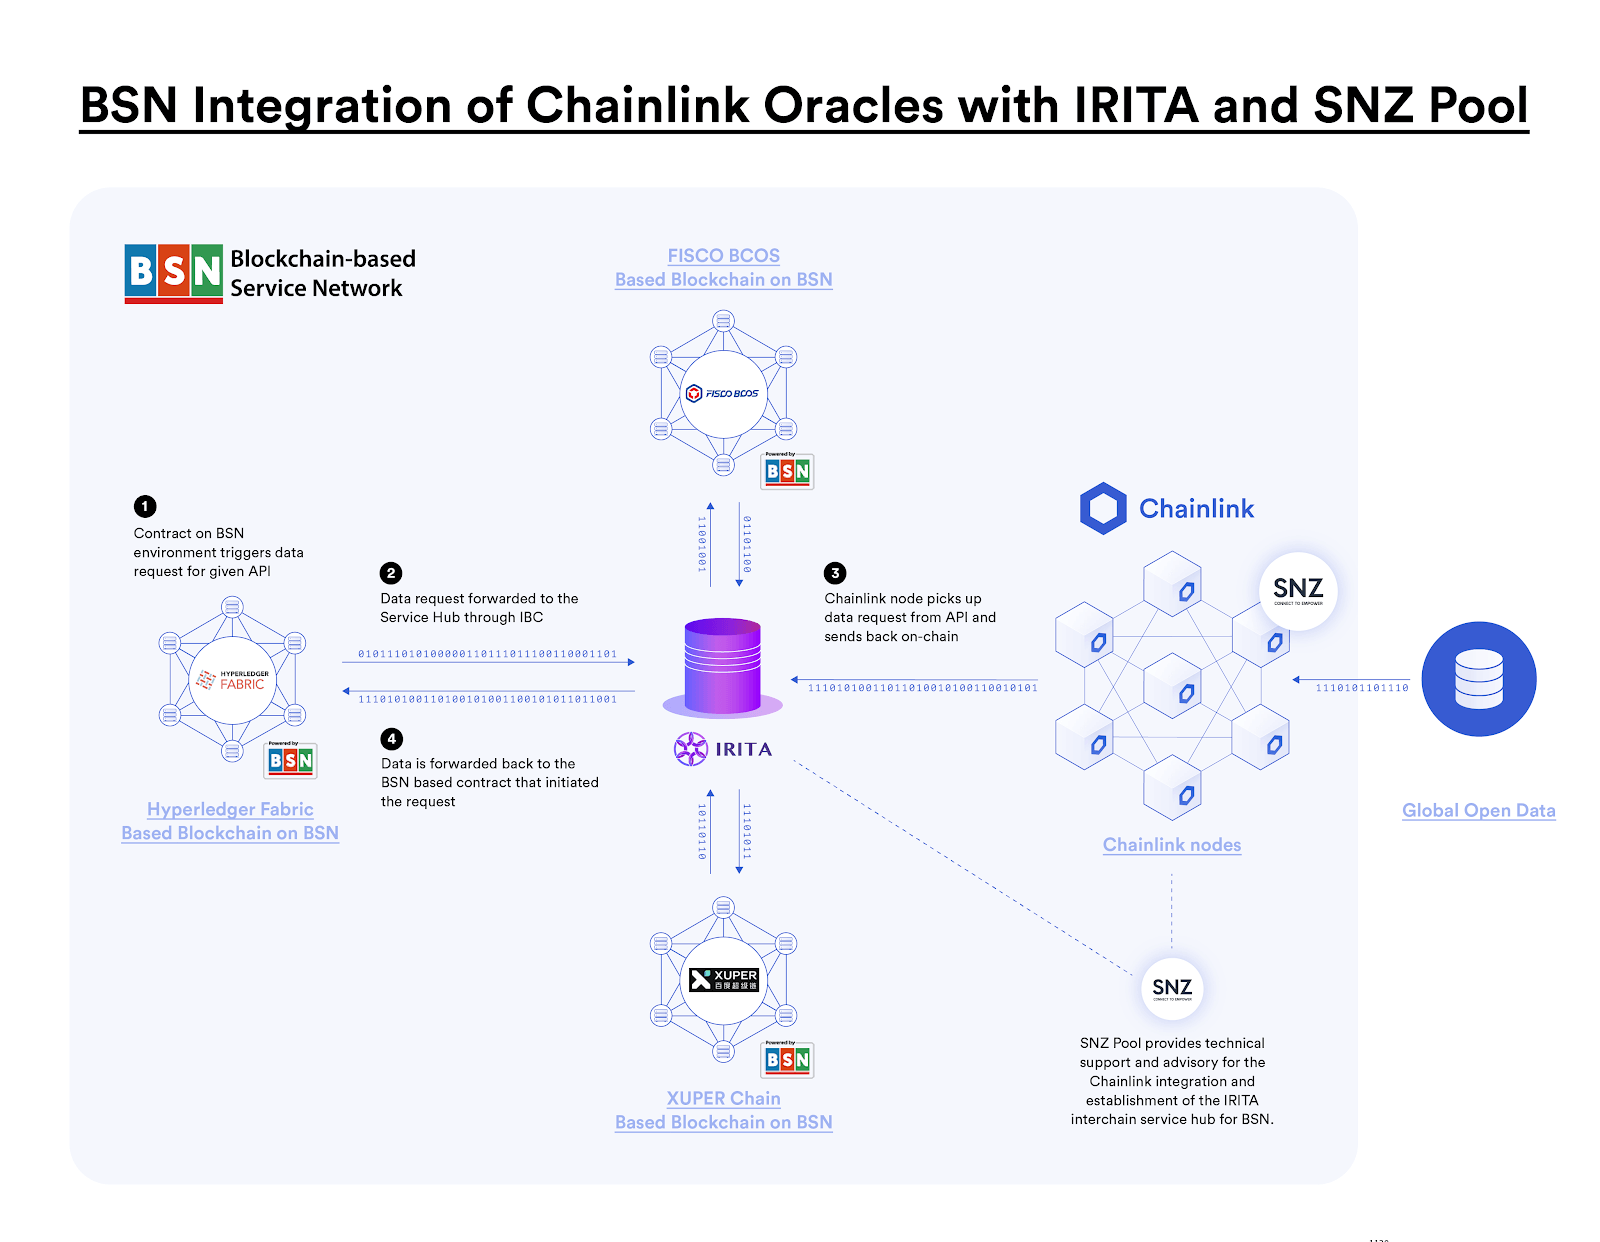 Chainlink and BSN